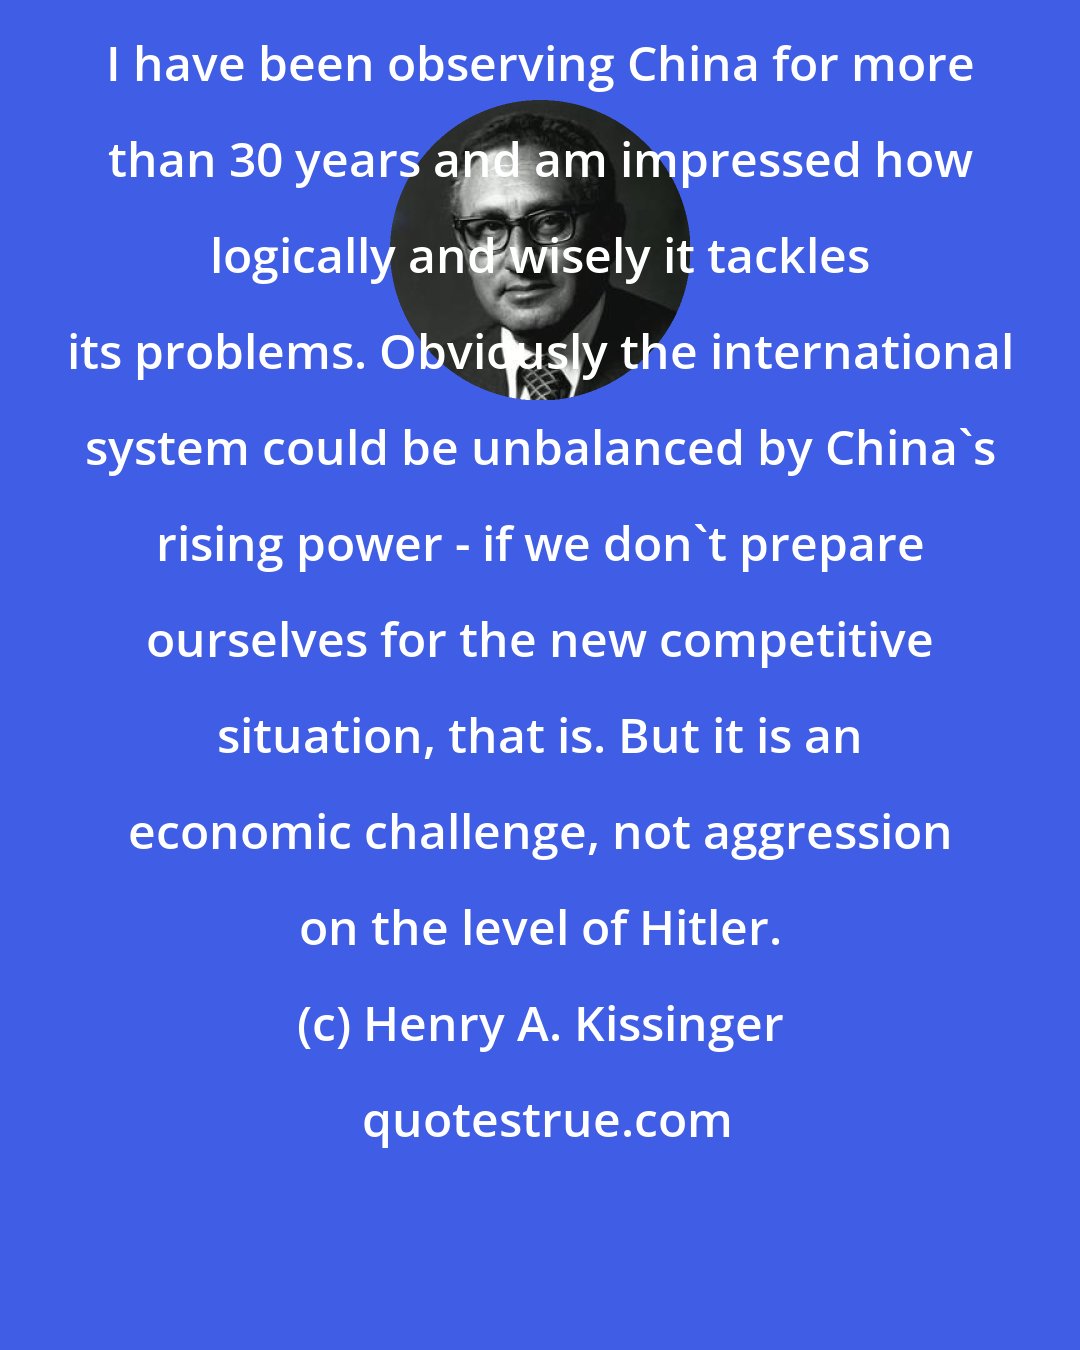 Henry A. Kissinger: I have been observing China for more than 30 years and am impressed how logically and wisely it tackles its problems. Obviously the international system could be unbalanced by China's rising power - if we don't prepare ourselves for the new competitive situation, that is. But it is an economic challenge, not aggression on the level of Hitler.